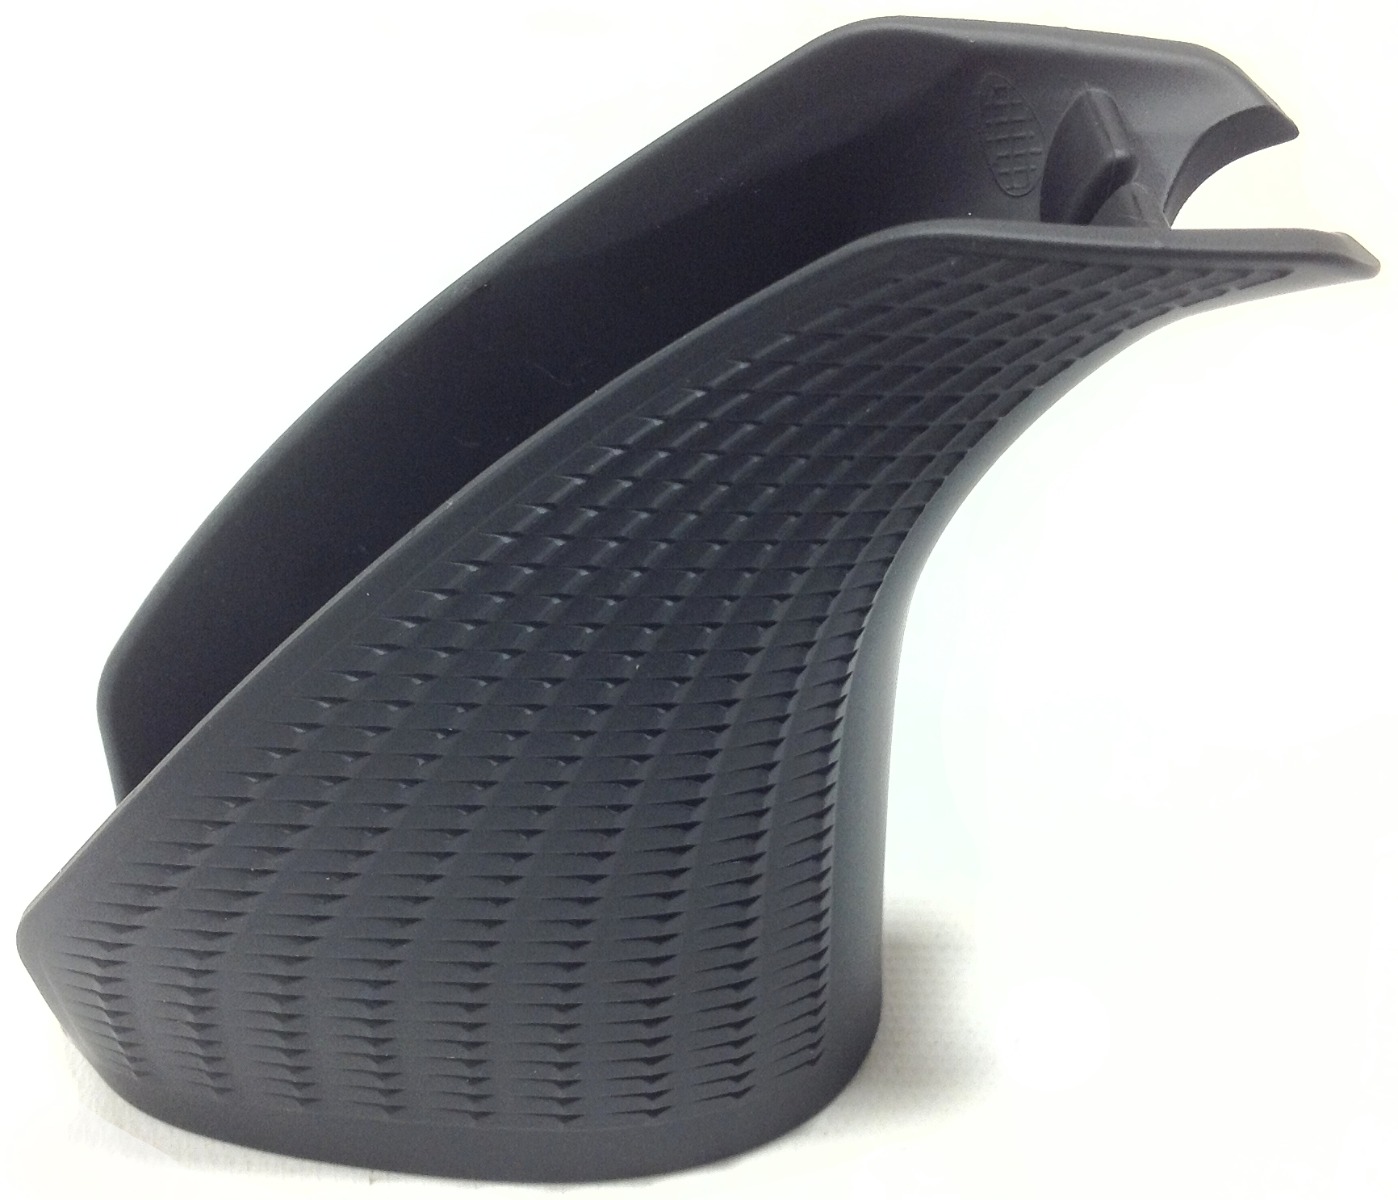 Rubberised Soft Touch Vertical Pistol Grip